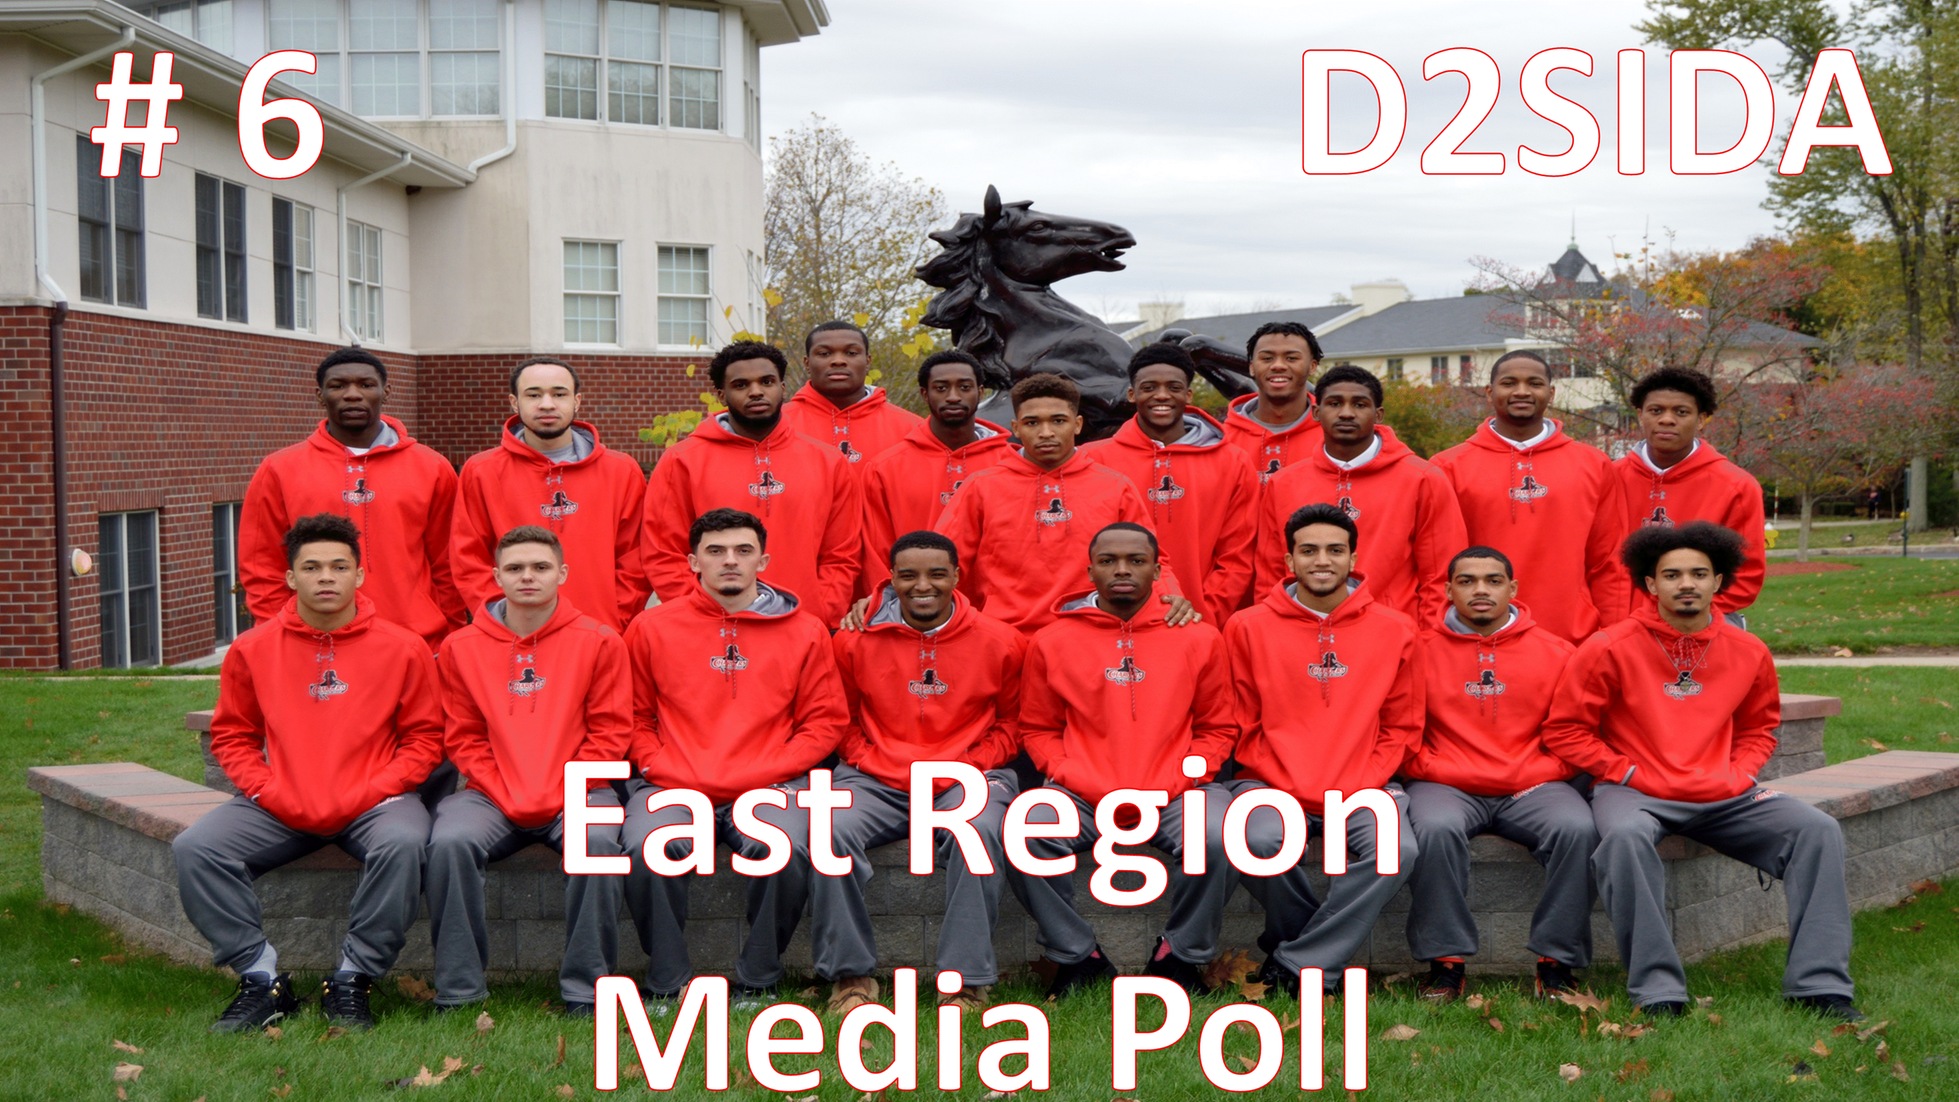 CHARGERS CLIMB BACK UP TO SIXTH IN D2SIDA EAST REGION MEDIA POLL